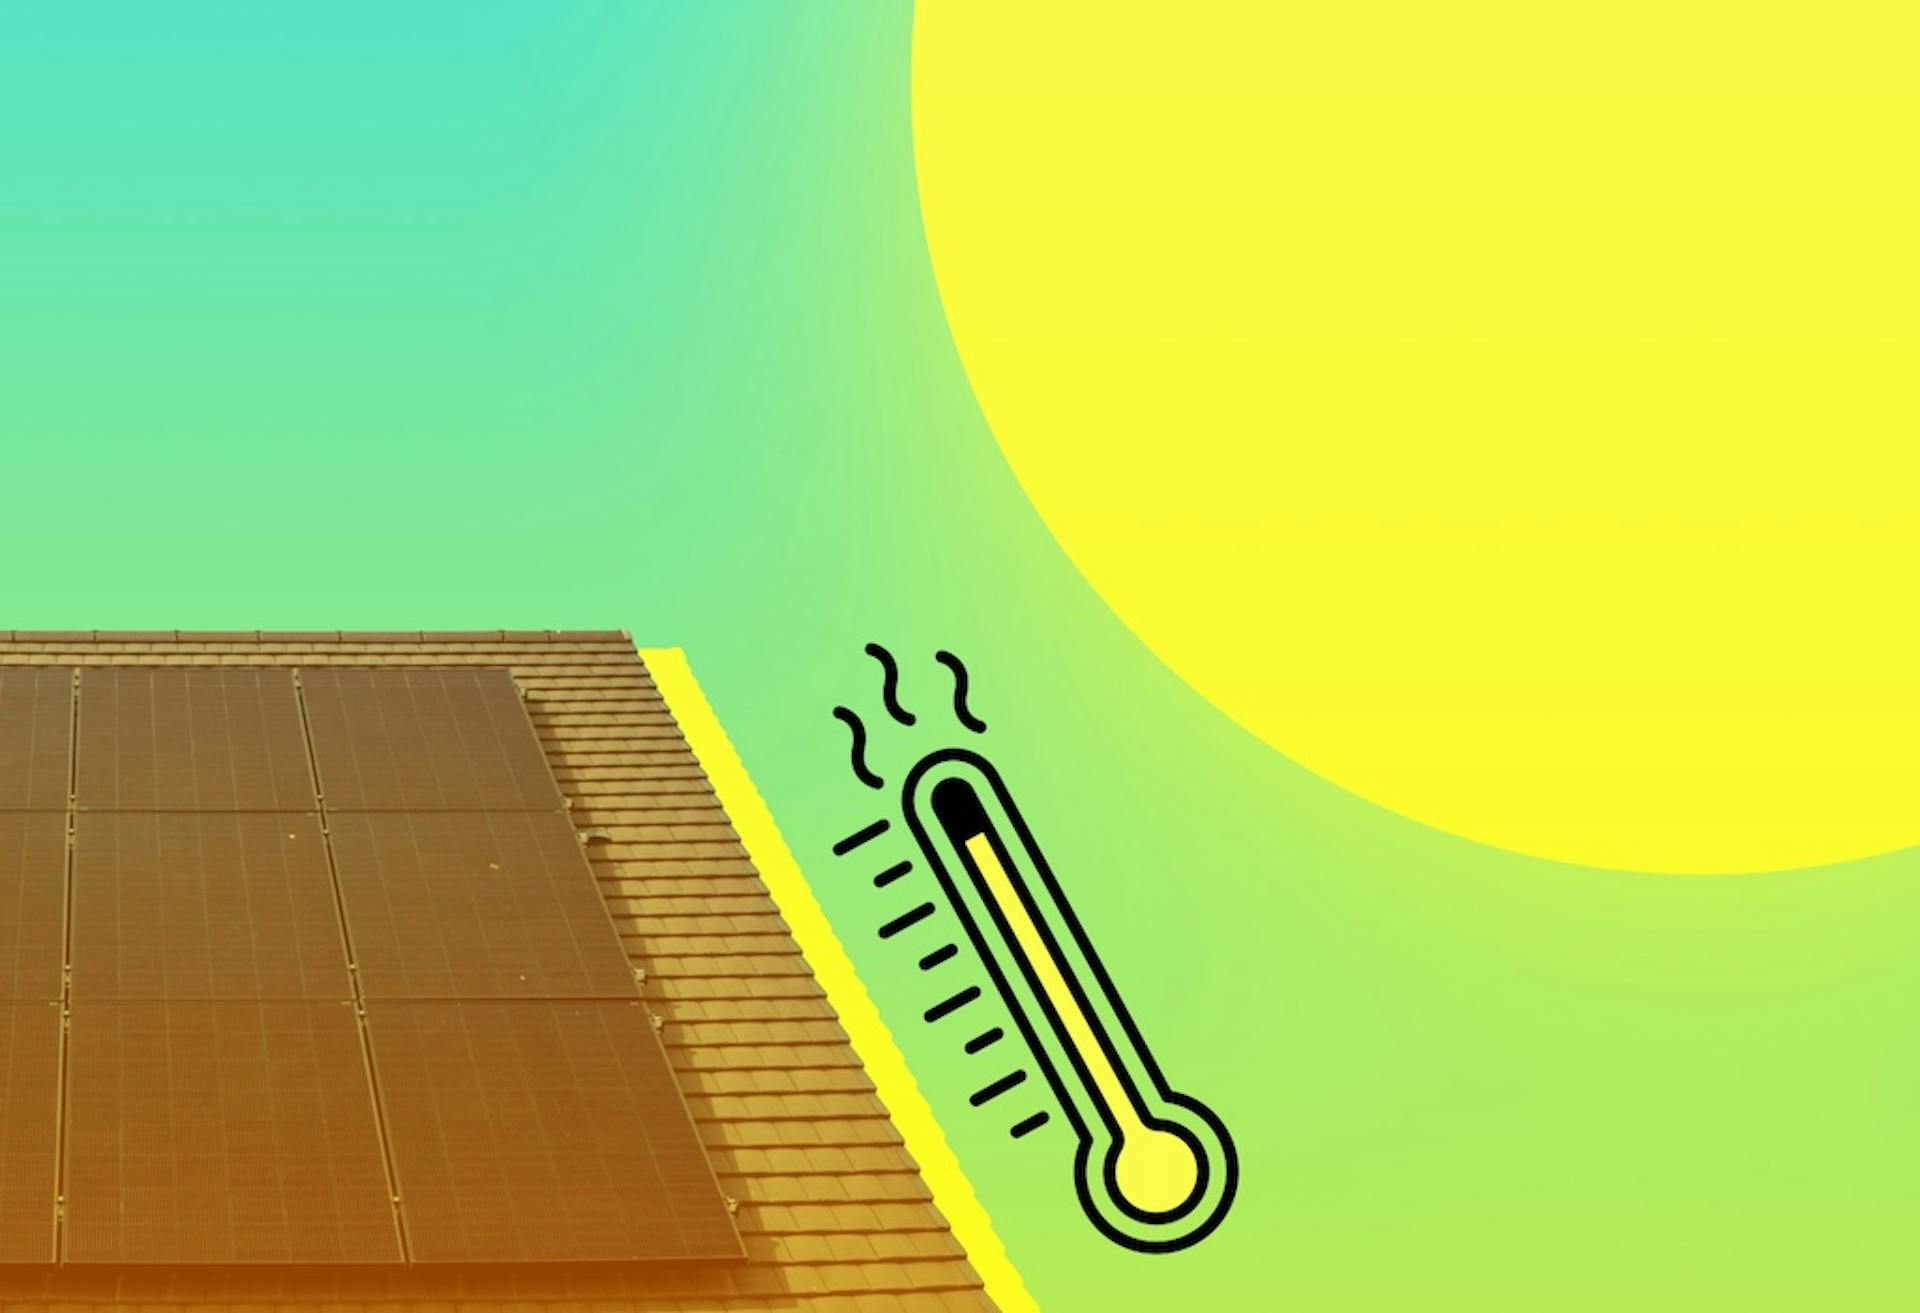 Black solar panels on a rooftop, a big cartoon yellow sun above it, and a cartoon thermometer showing a high temperature, pale blue background